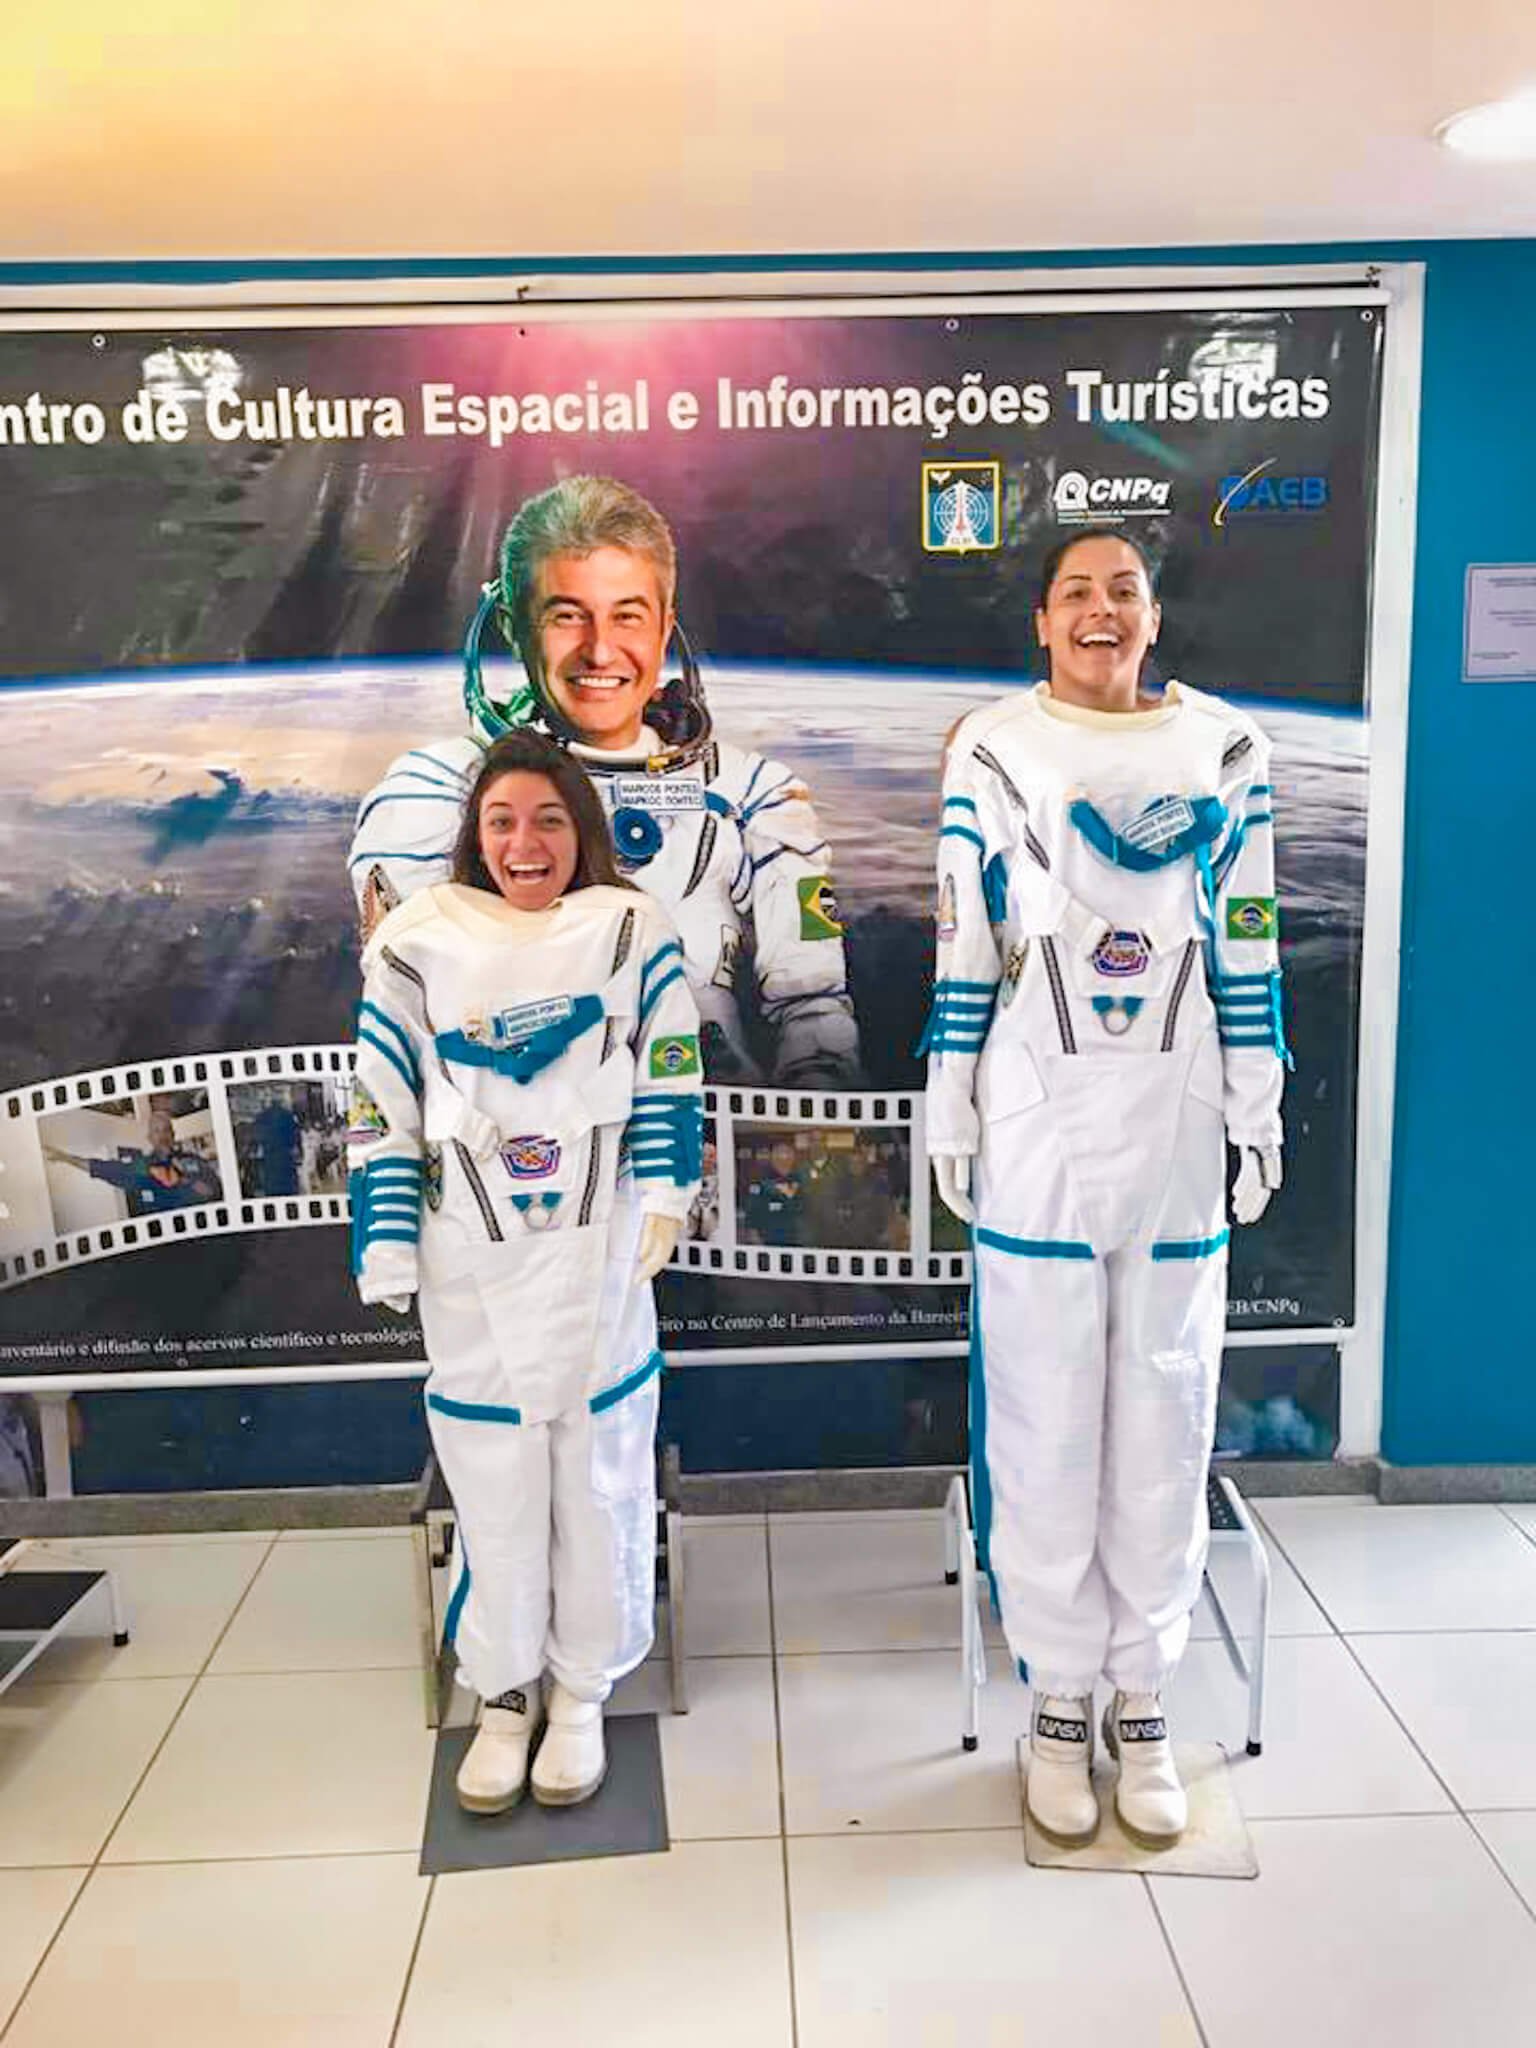 Natal space center, things to do in Natal, Brazil